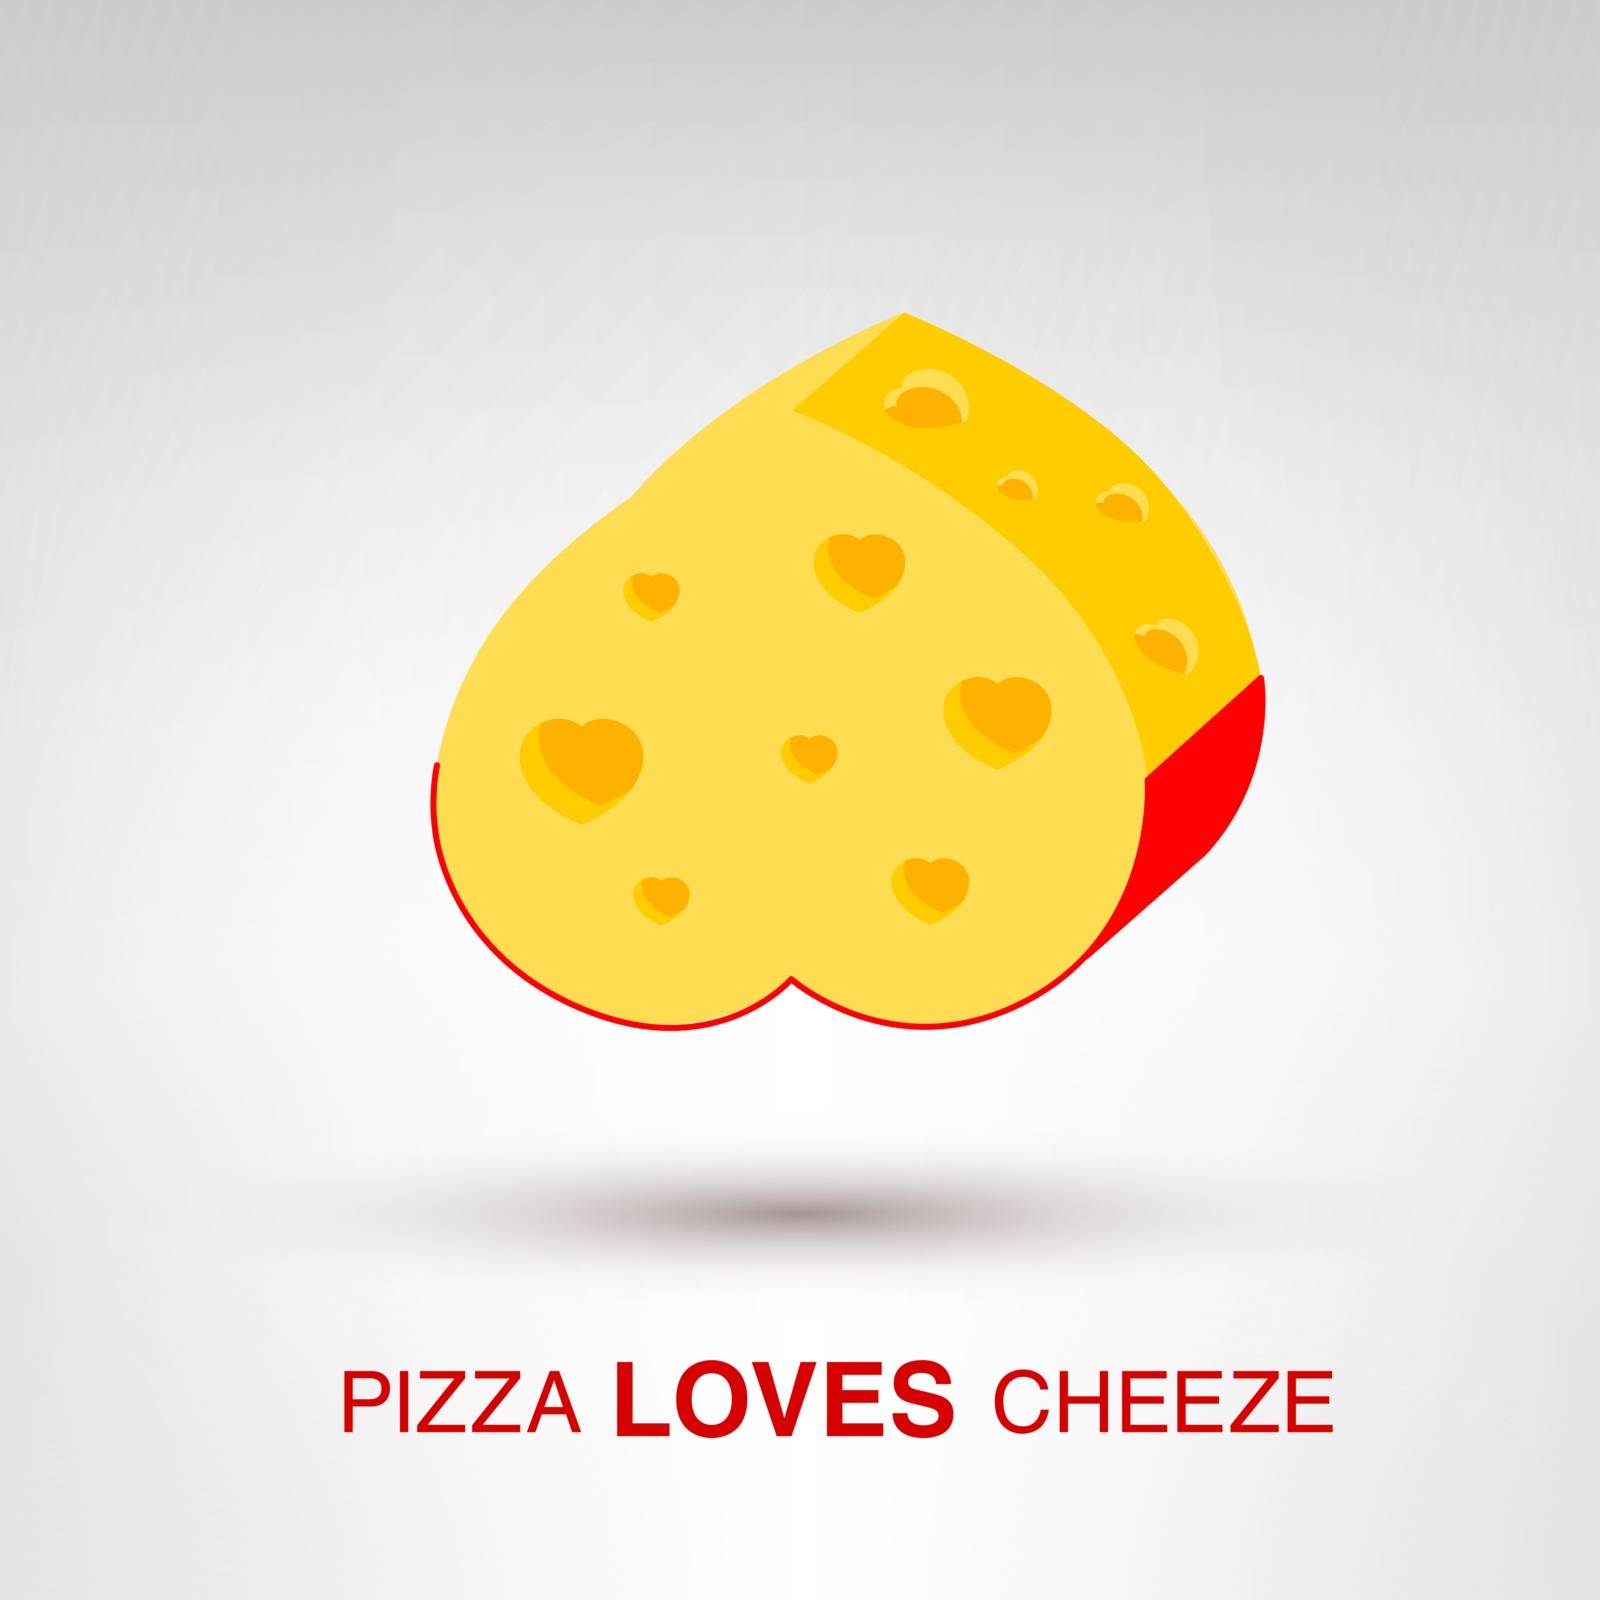 Pizza Loves Cheeze - creative Valentines Day heart-shaped cheese concept vector illustration